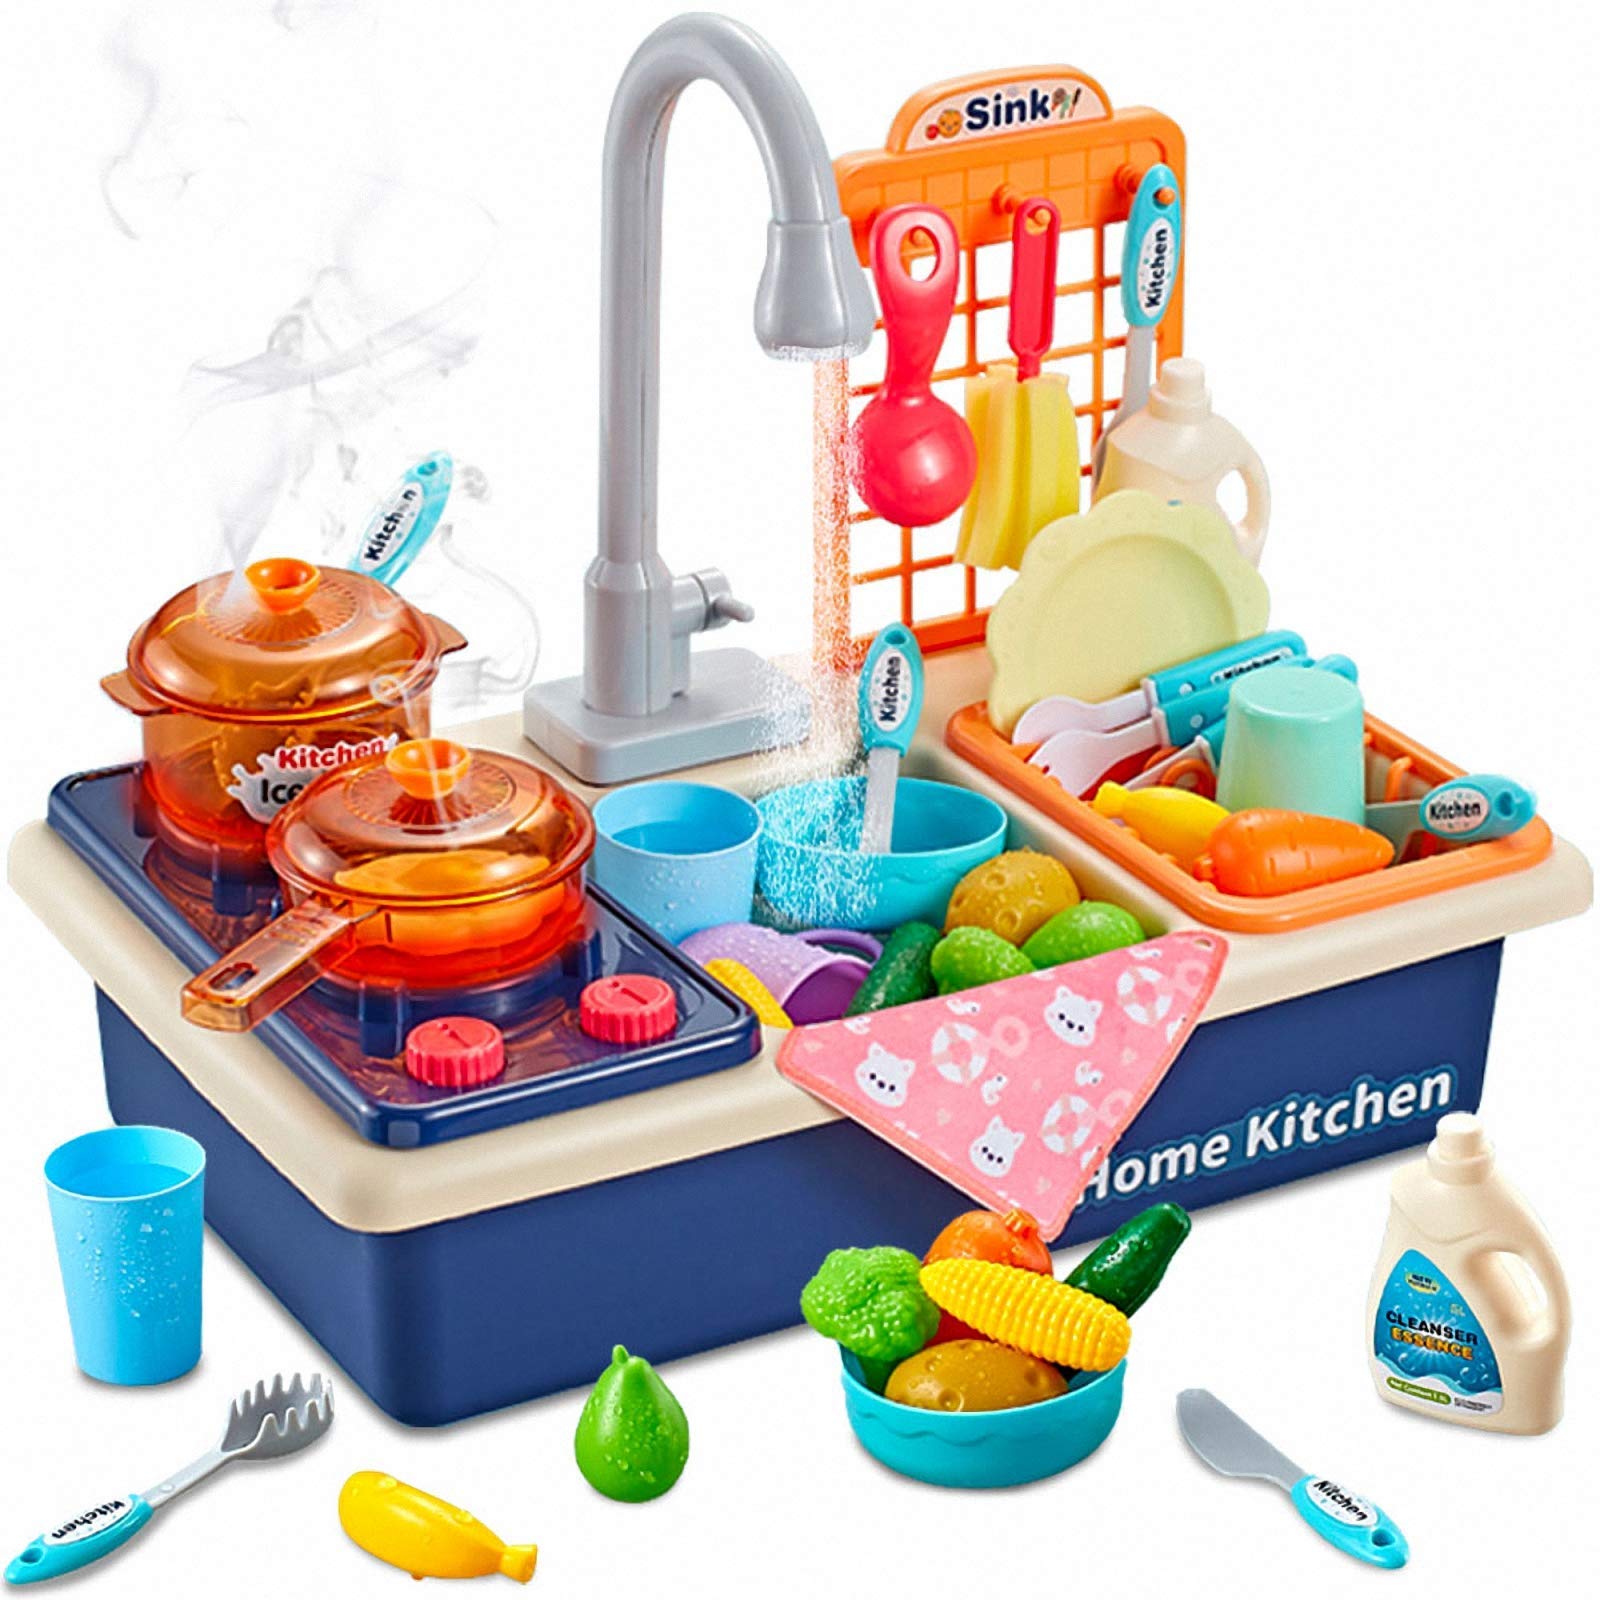 Arkmiido Water Play Cooking Stove Play Kitchen Sink Toys with Running Water House Wash Up Kitchen Sets with Realistic Light Play Dishes Accessories for Toddlers Featured Image